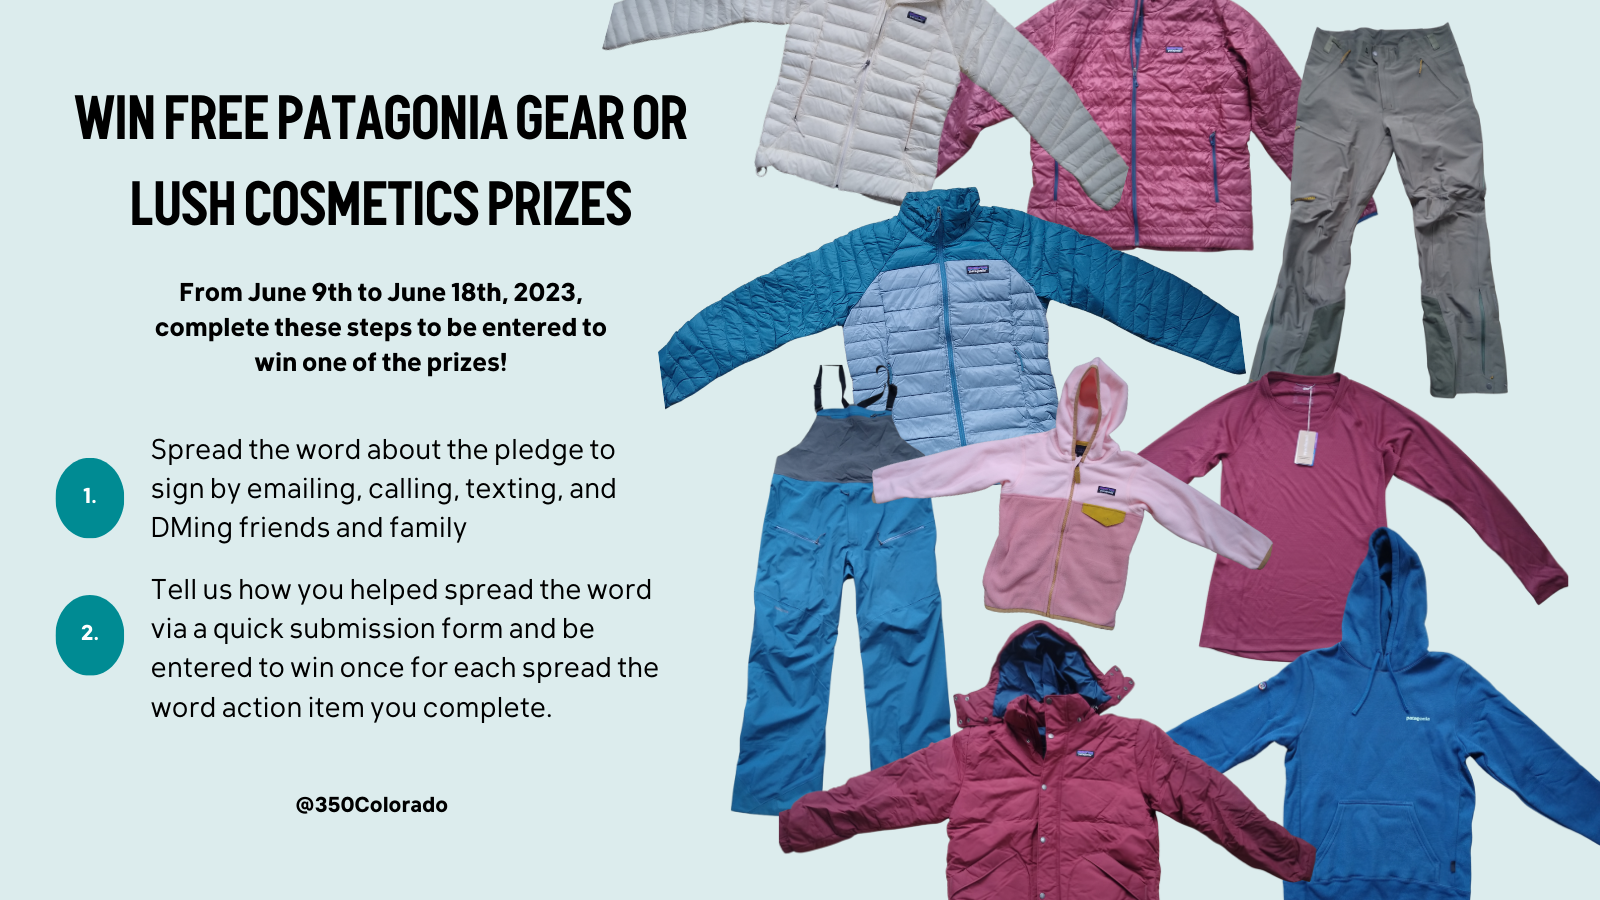 Images of the Patagonia gear you can with by spreading the word about the pledge to sign